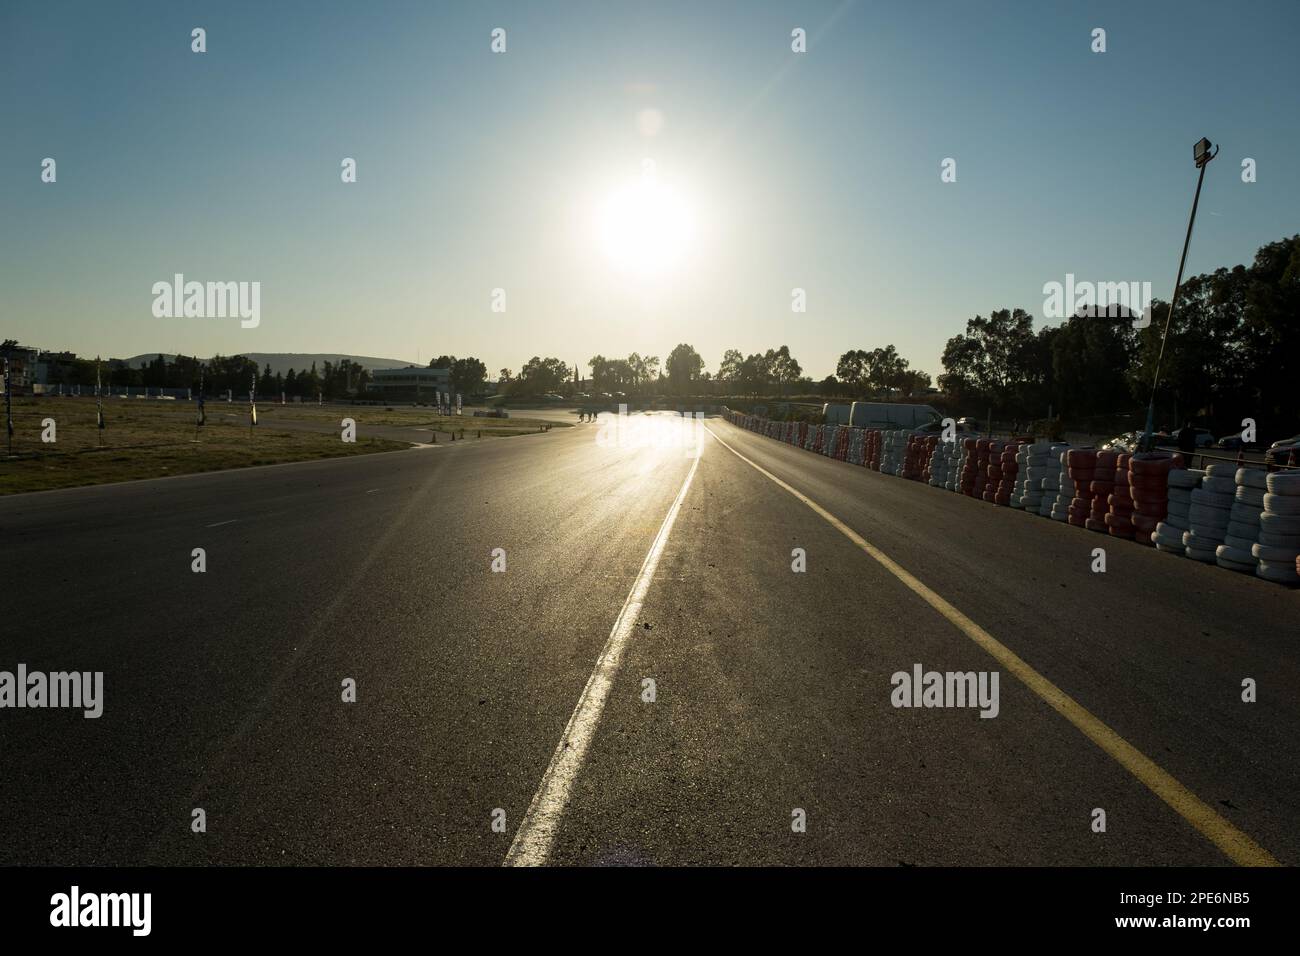 Road view of race track with some barrier tires. Stock Photo